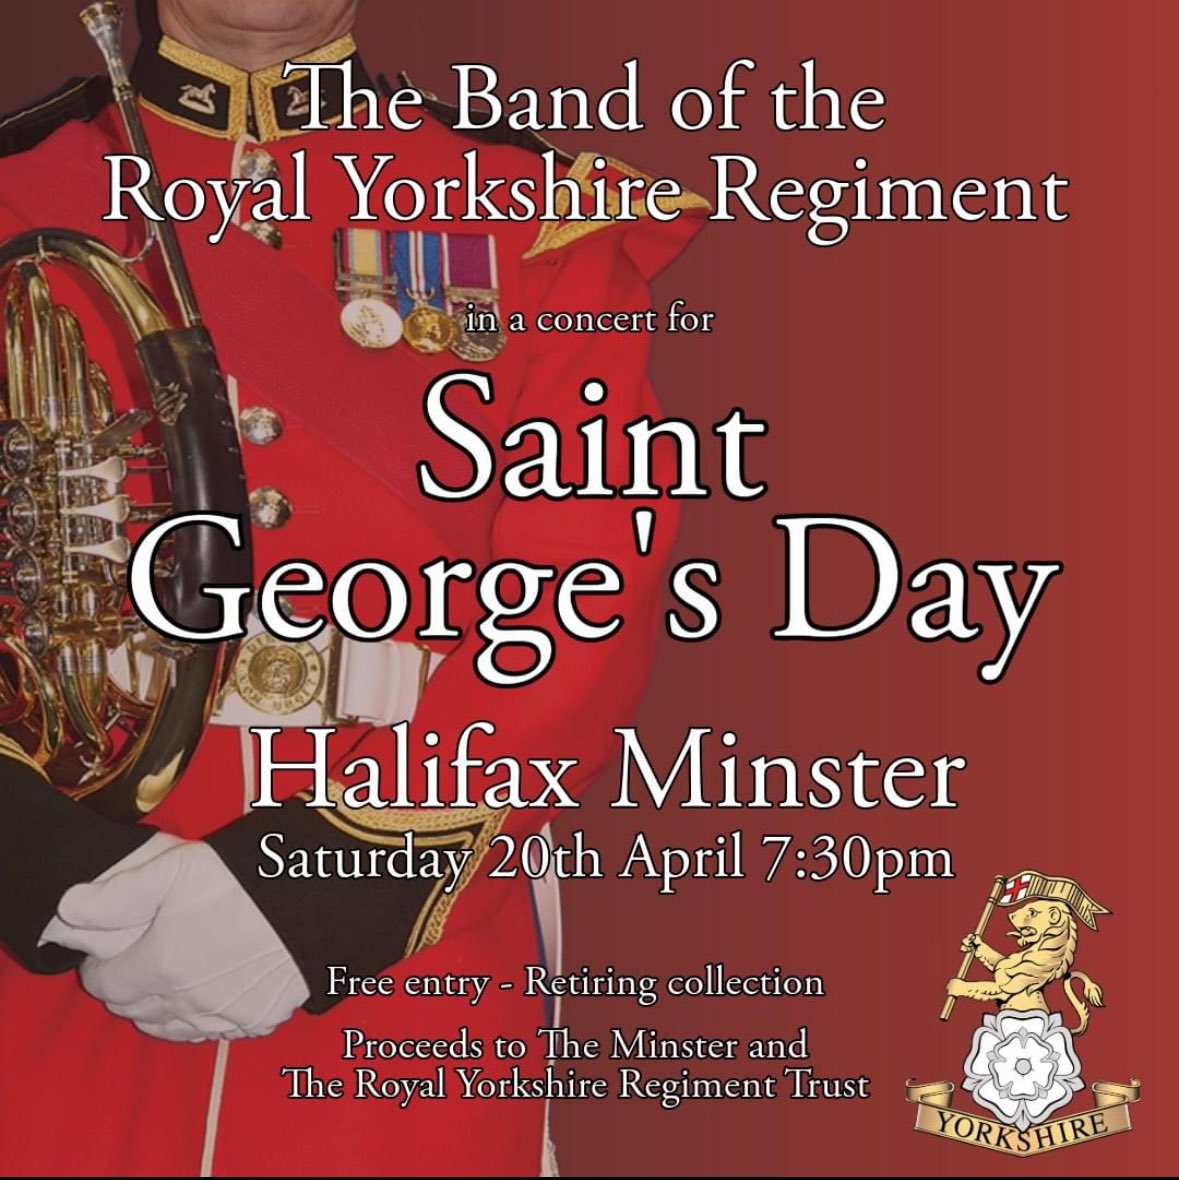 🎶 Looking for Saturday night plans? Join us for a FREE concert at @HalifaxMinster tomorrow night for our St. George’s Day themed event! 🏴󠁧󠁢󠁥󠁮󠁧󠁿 We can't wait to see you there for an evening of music and entertainment. #HalifaxMinster #StGeorgesDay #ConcertNight 🎵